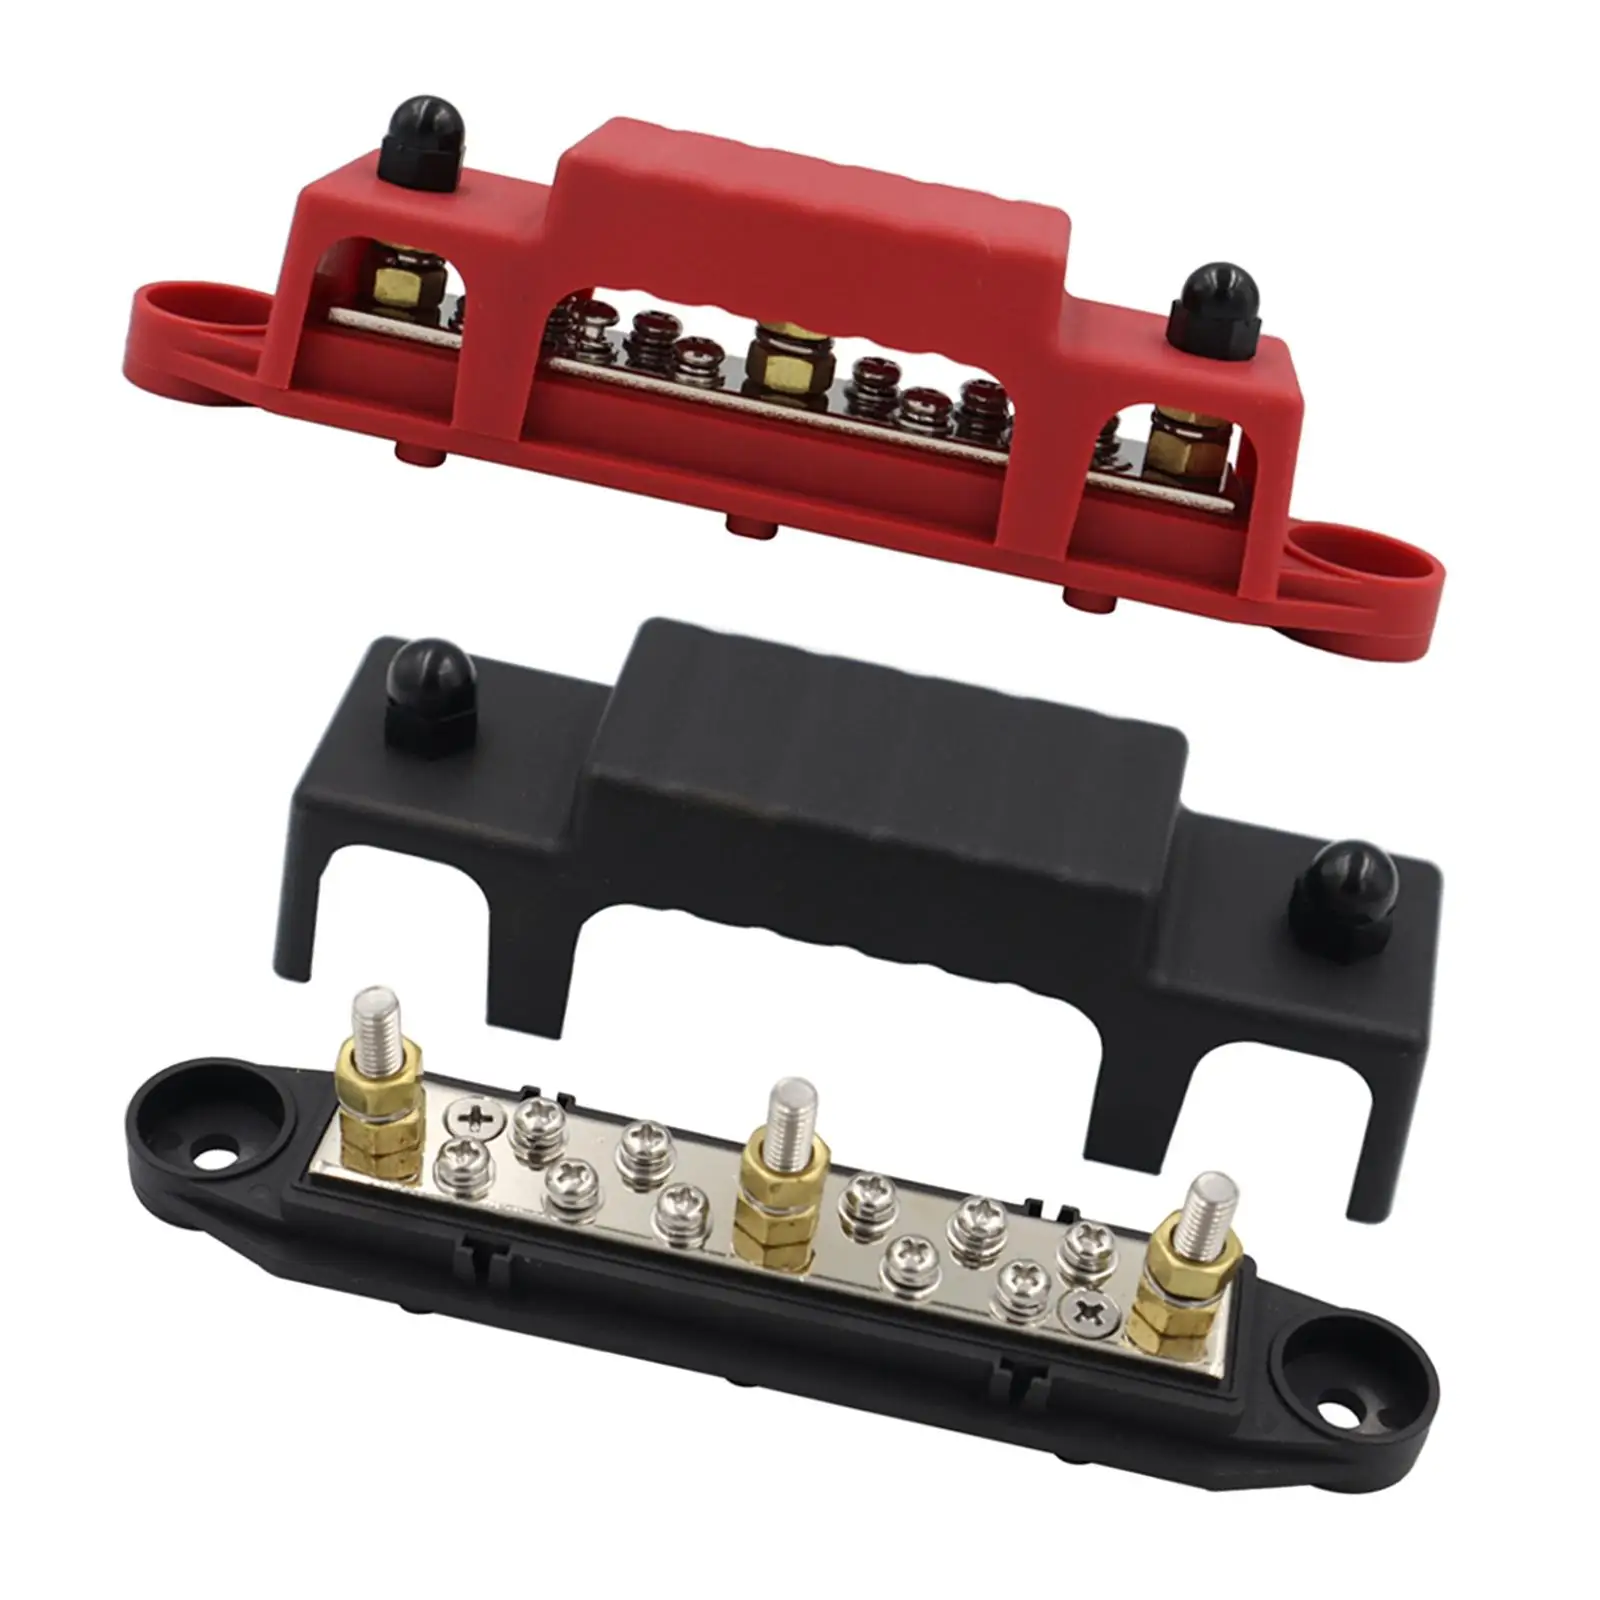 10 Point Power Distribution Block 150A Rated with M6 Nuts Busbar for Yachts